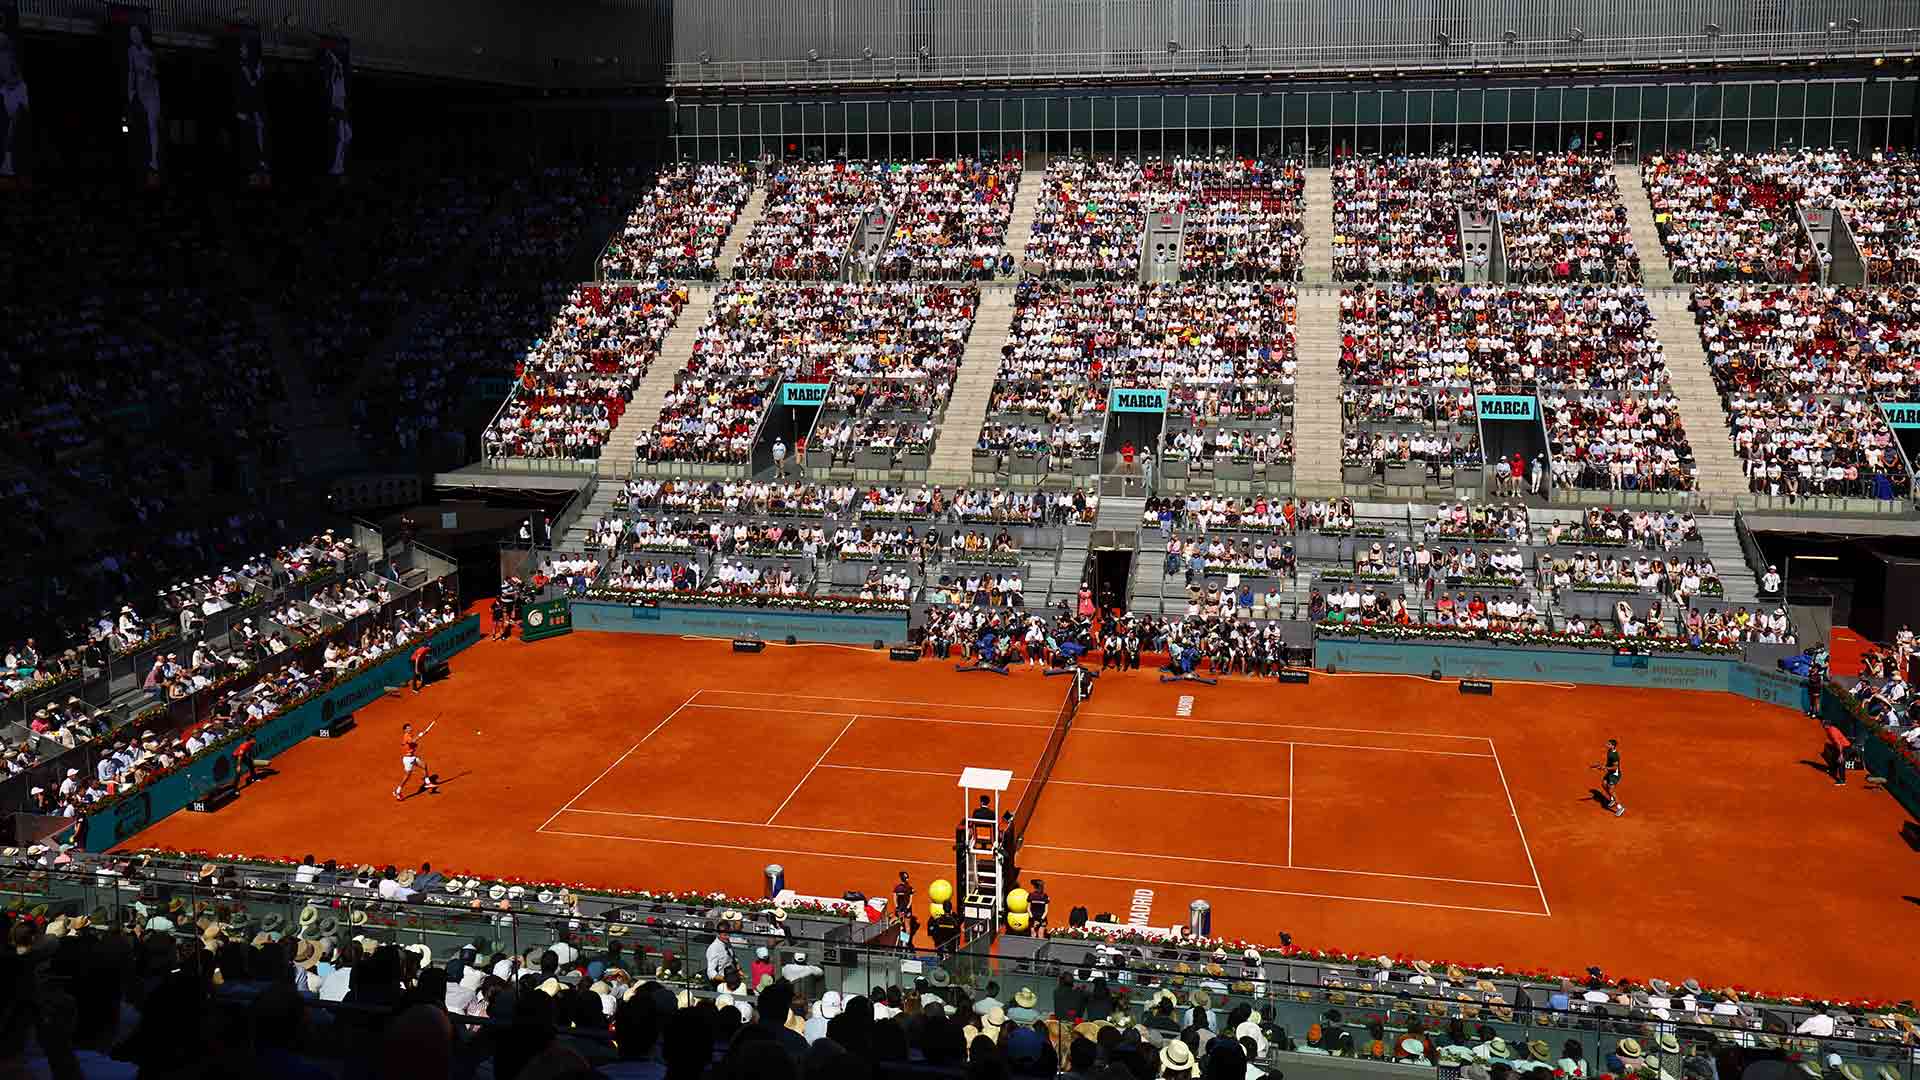 The Mutua Madrid Open has been held at the Caja Magica since 2009.